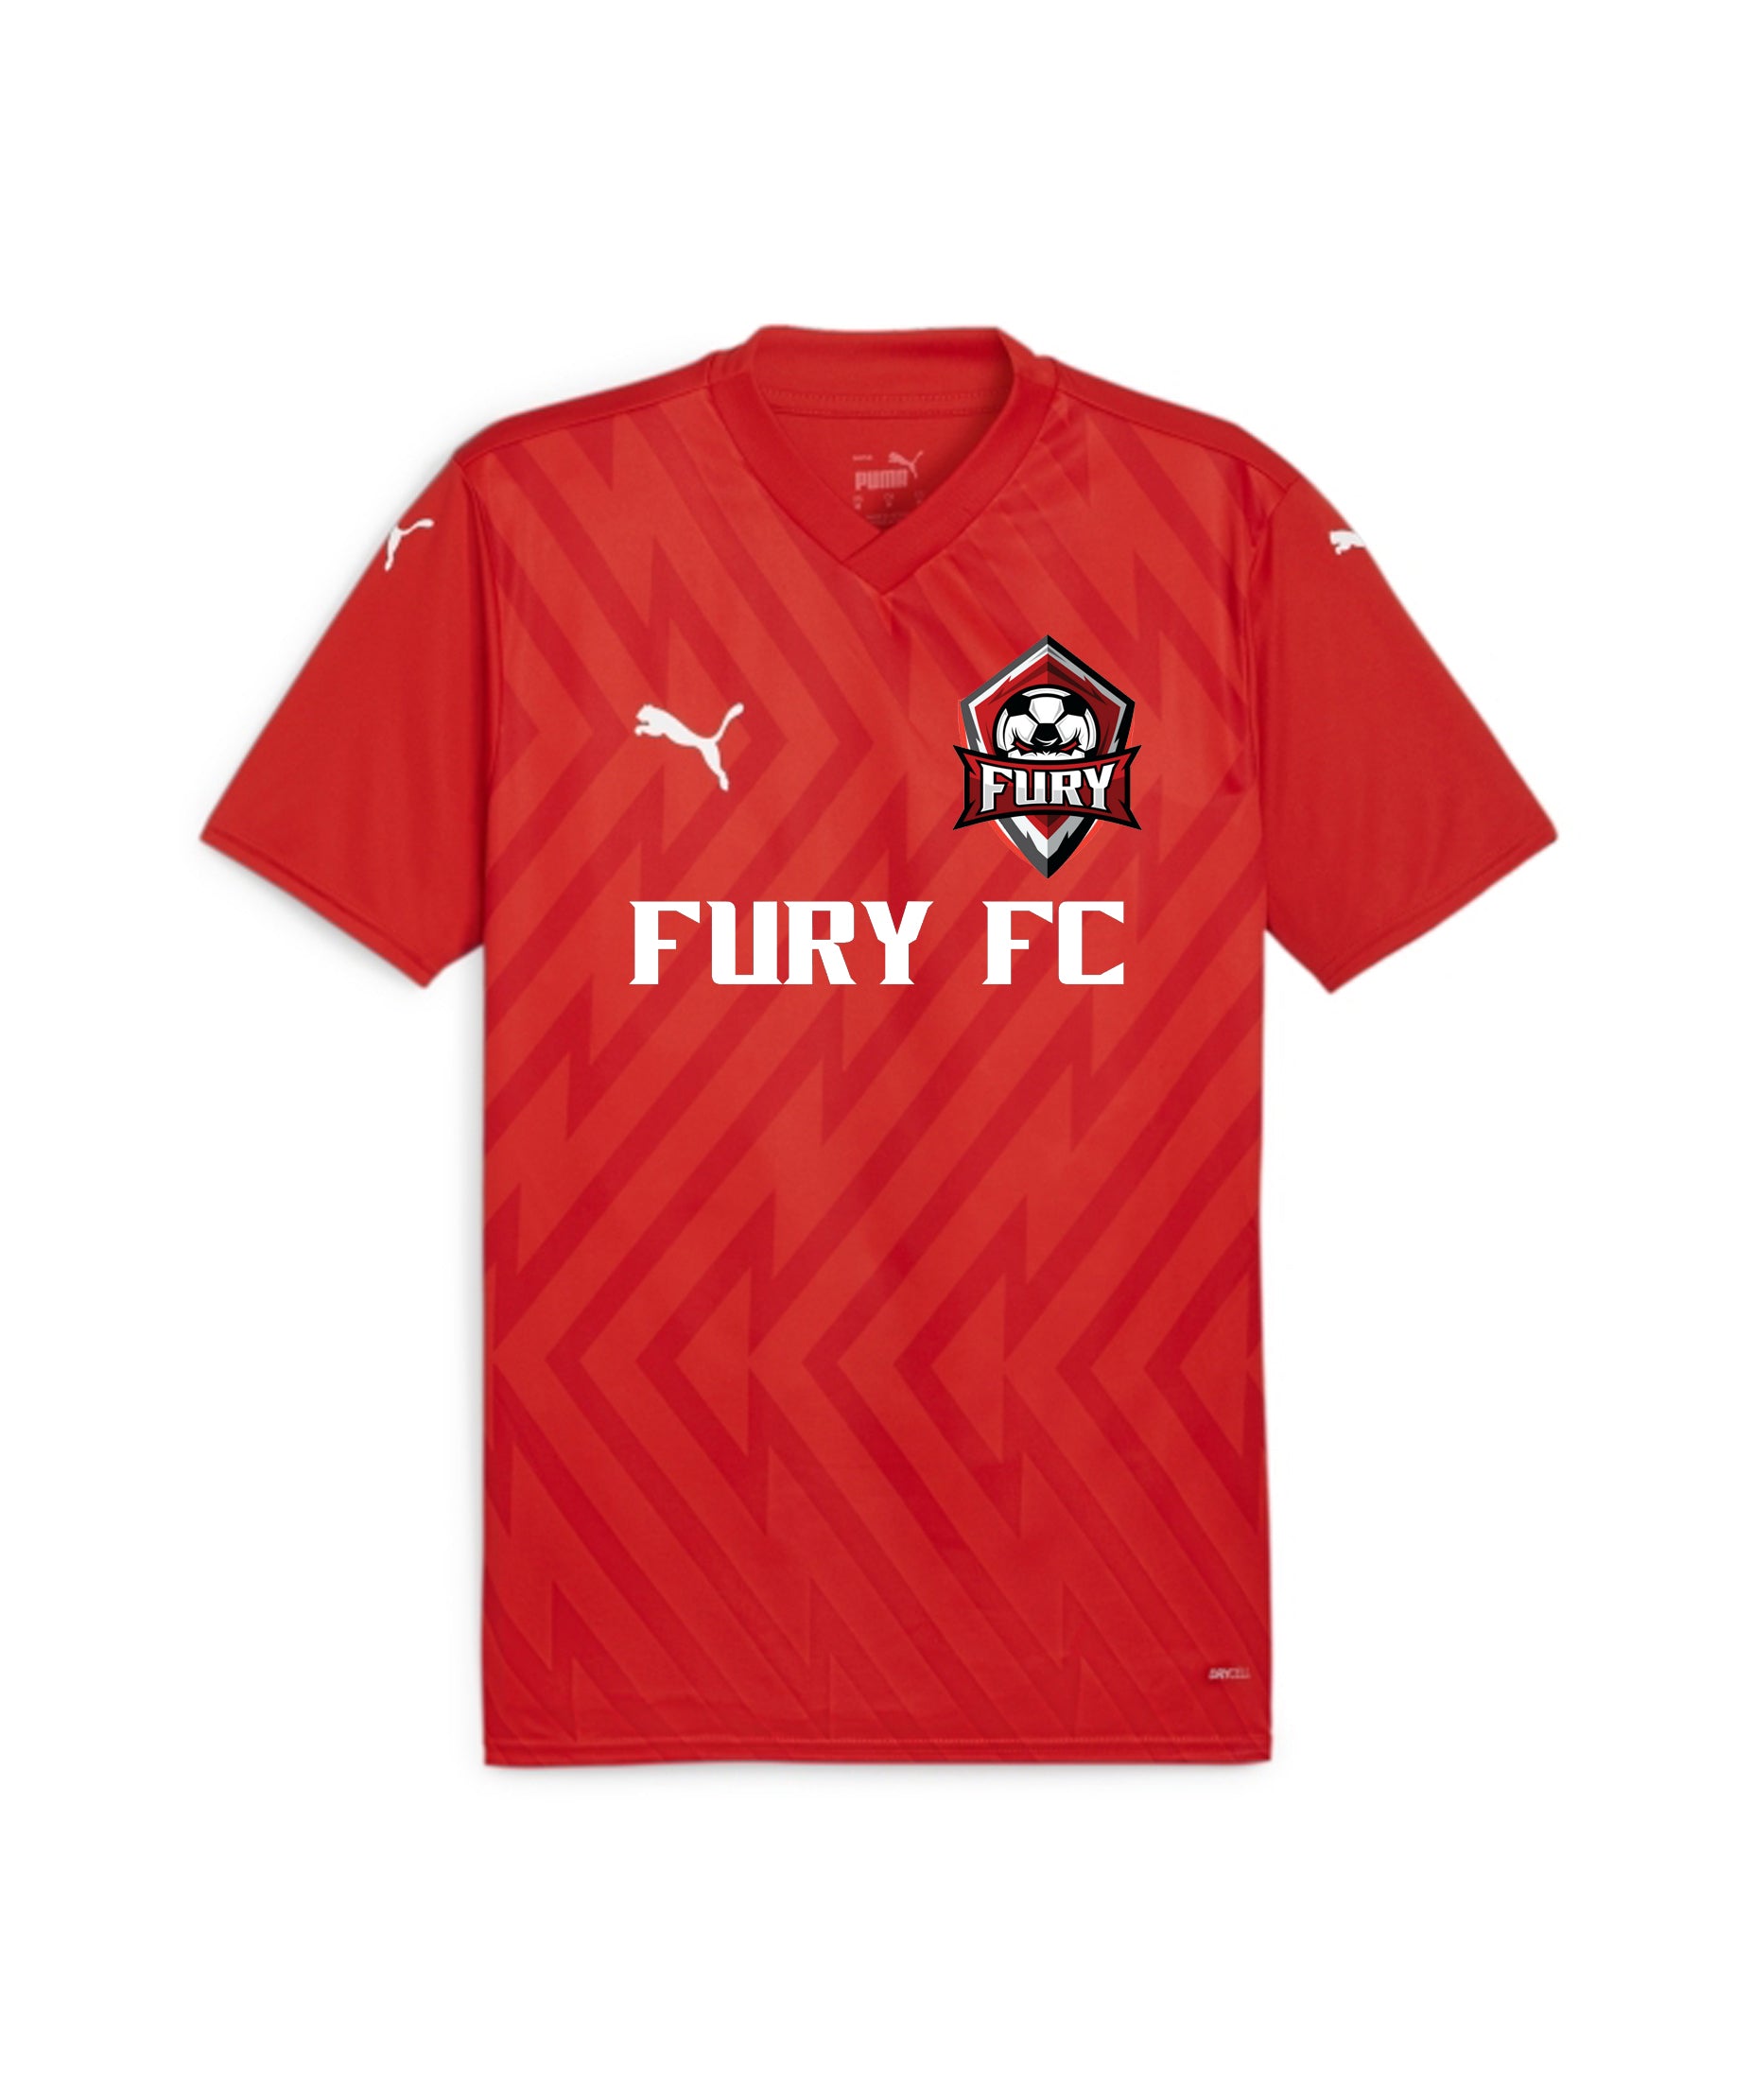 FURY FC YOUTH AND MEN'S PUMA TEAM GLORY 26 JERSEY - RED OR BLACK